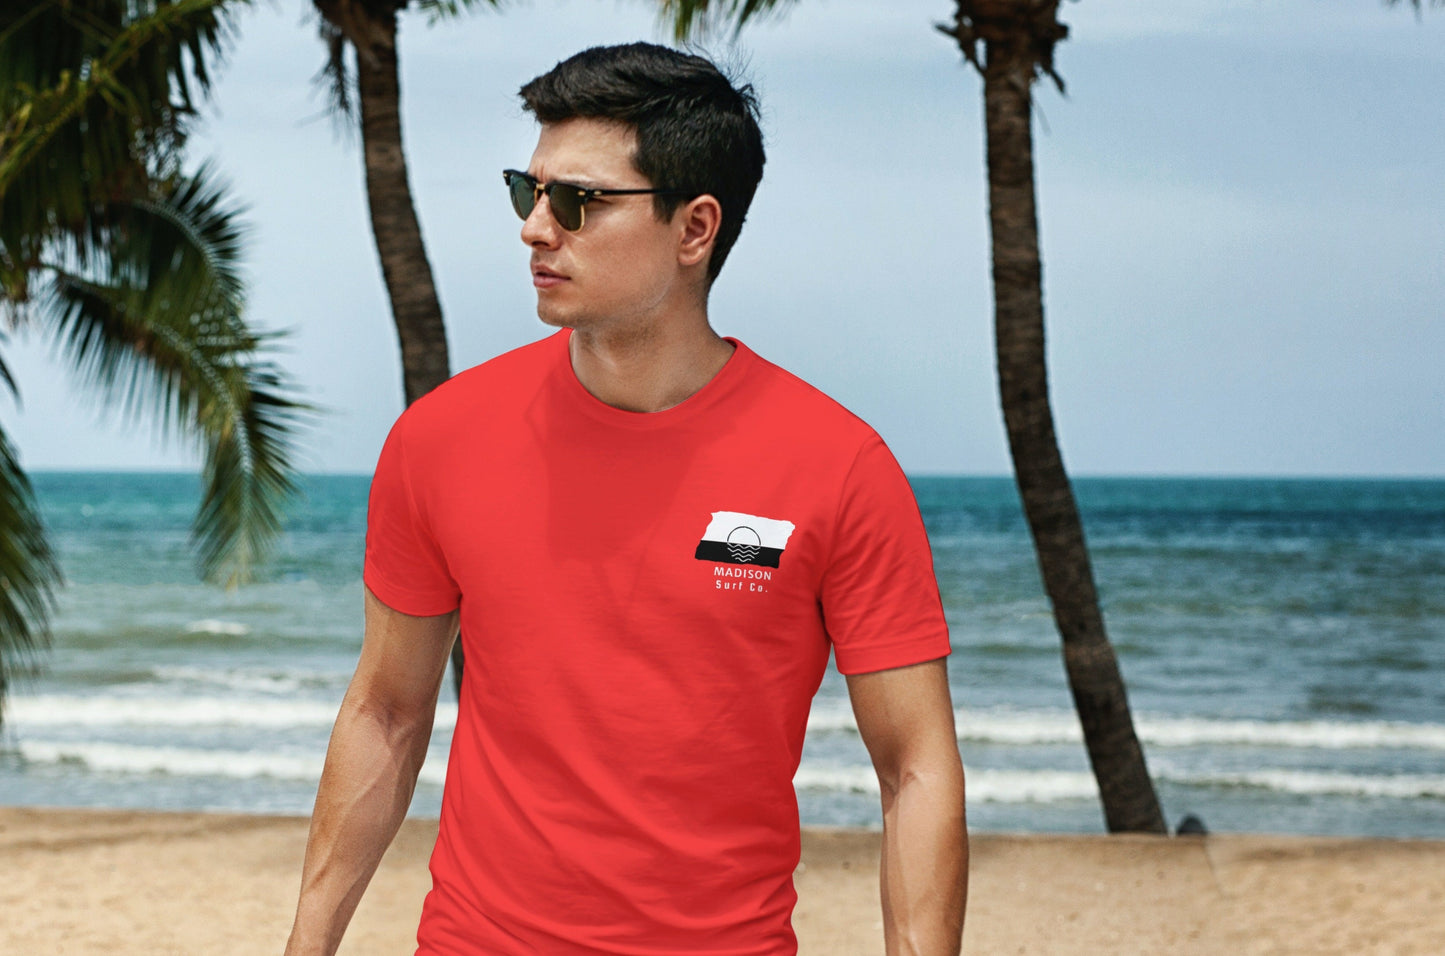 Madison Surf Co. Red Surfboard Shirt